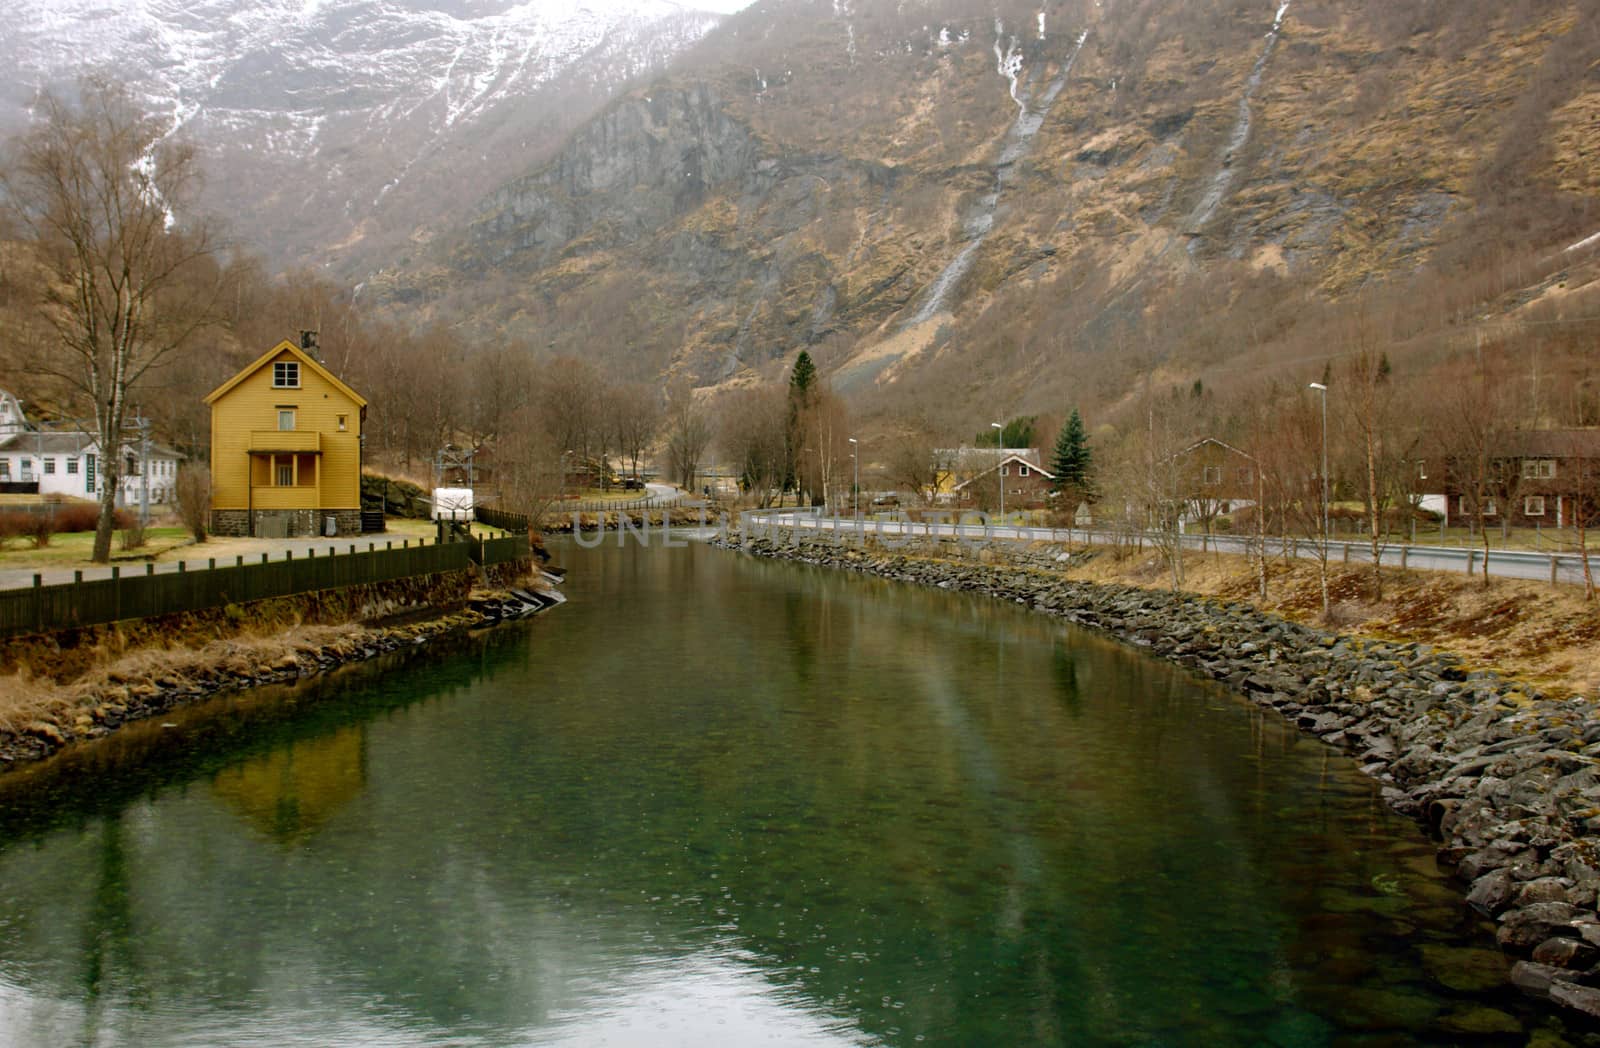 River passing trough Flam by ptxgarfield